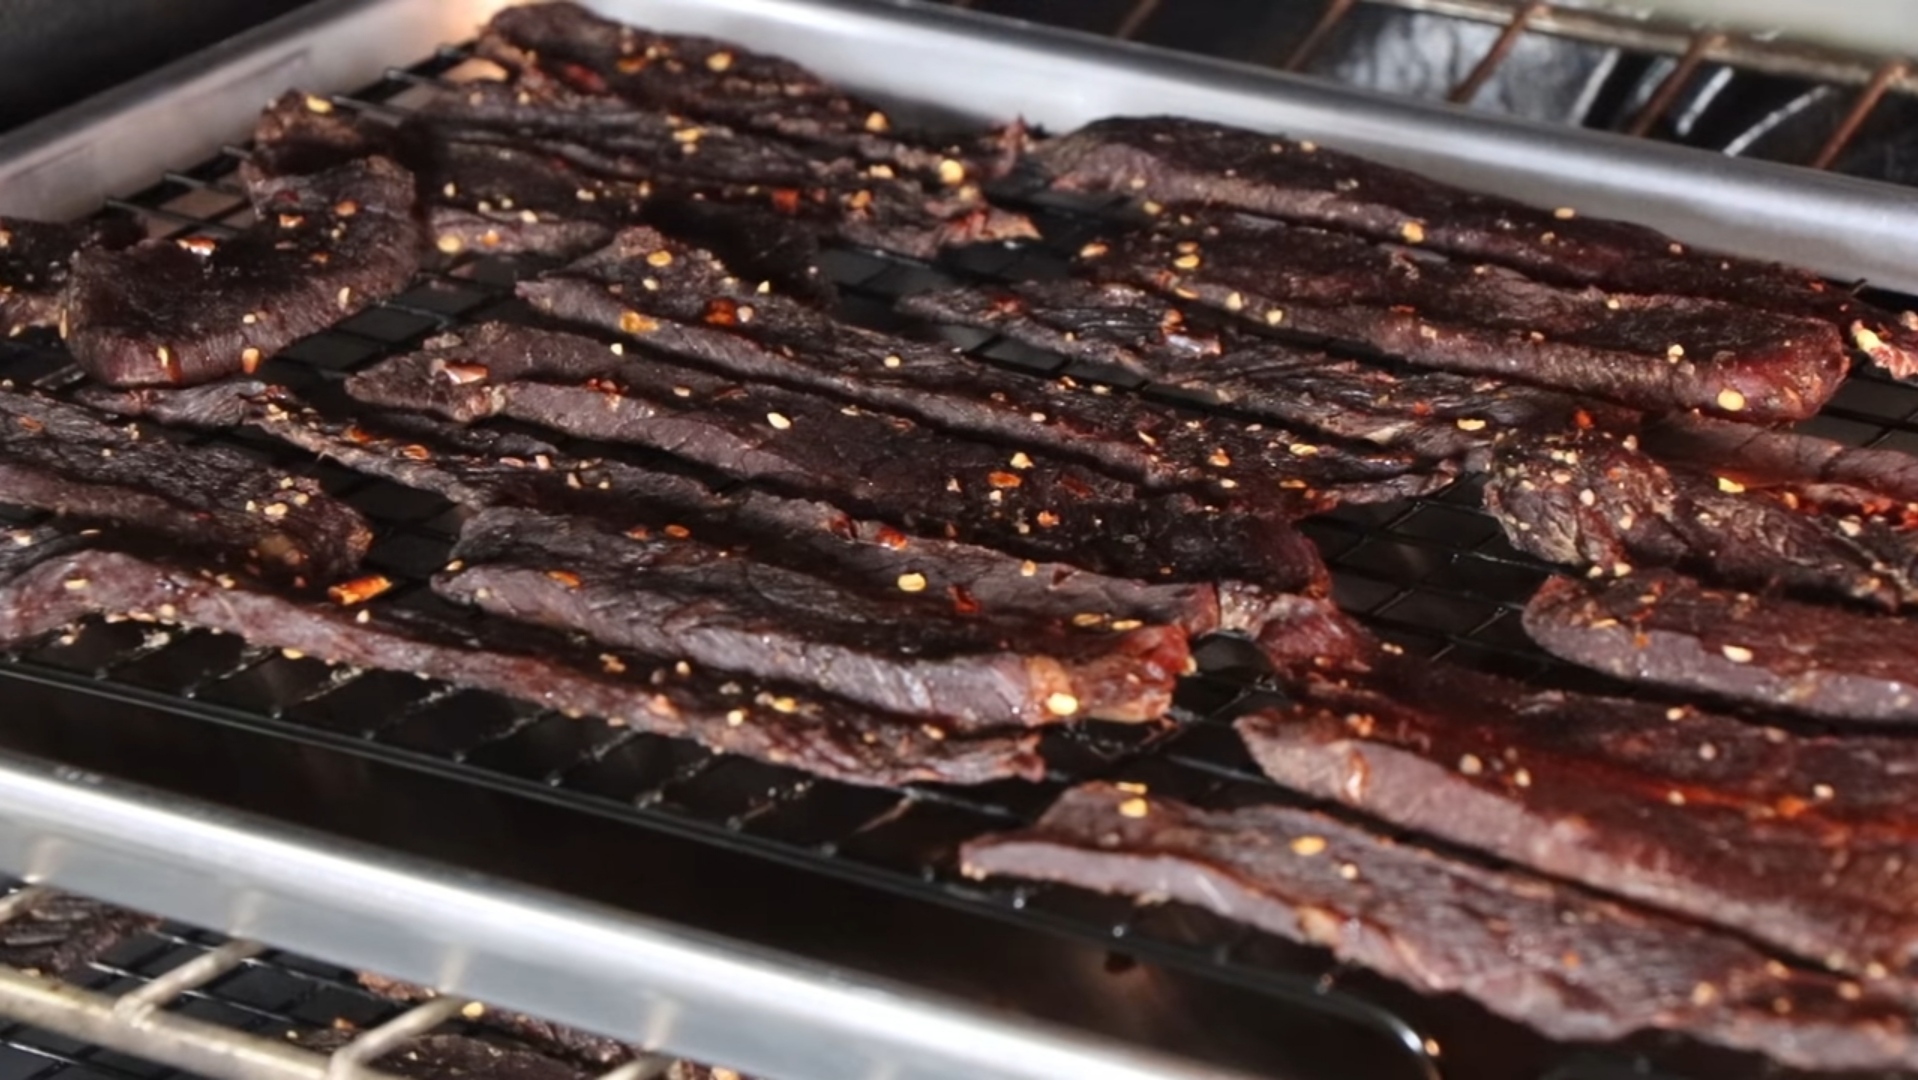 How To Make Beef Jerky with a Dehydrator: Step by Step Guide - Sous Vide Guy